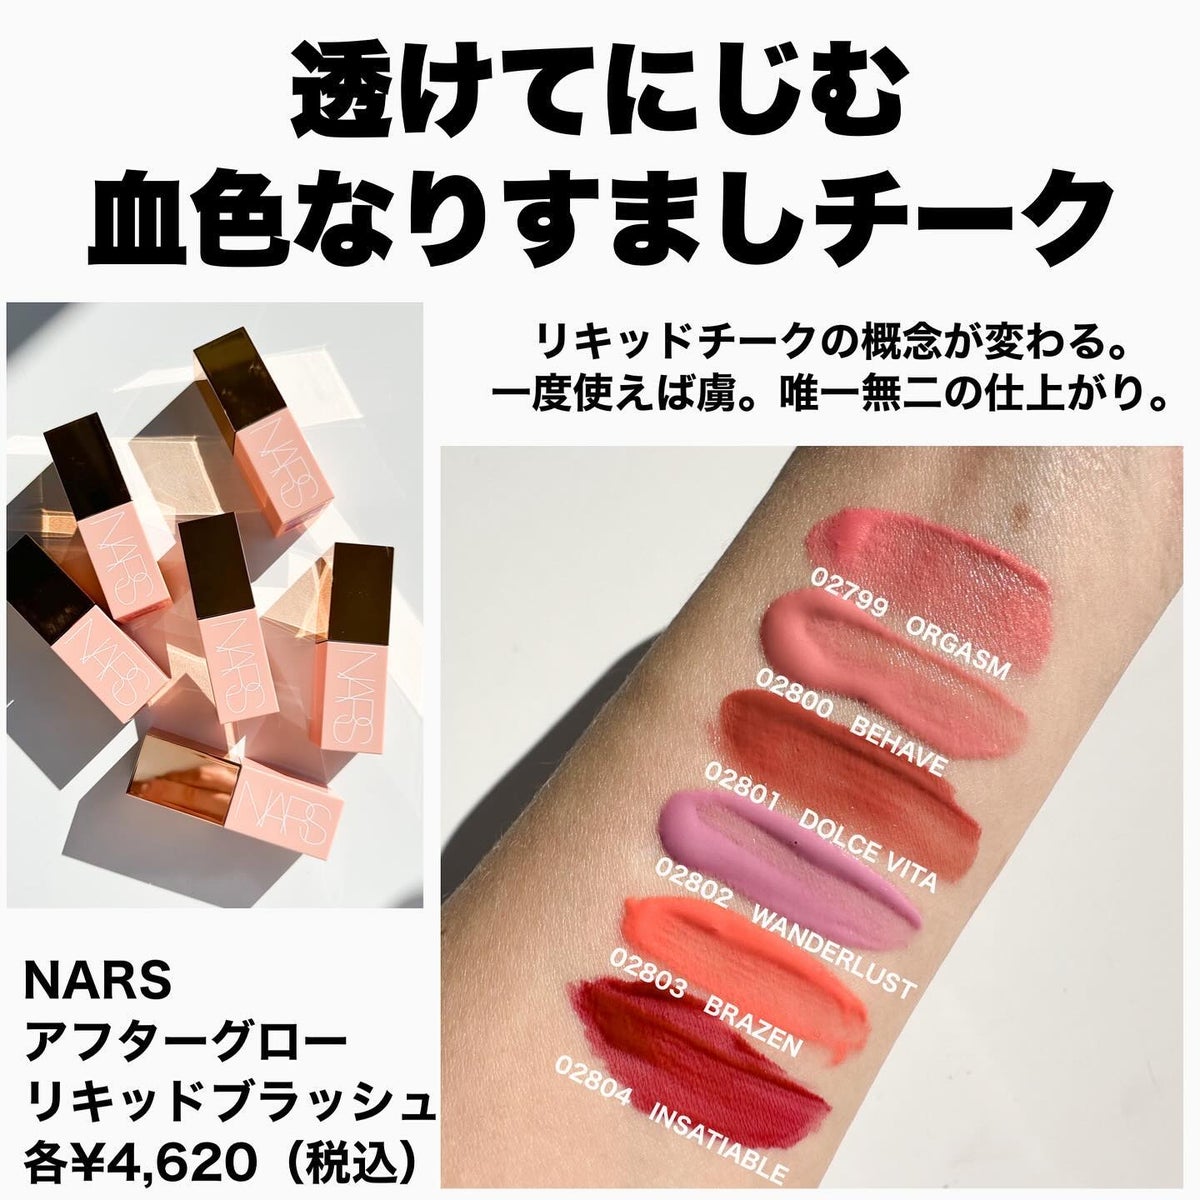 NARS リキッドチーク | solublink.com.br